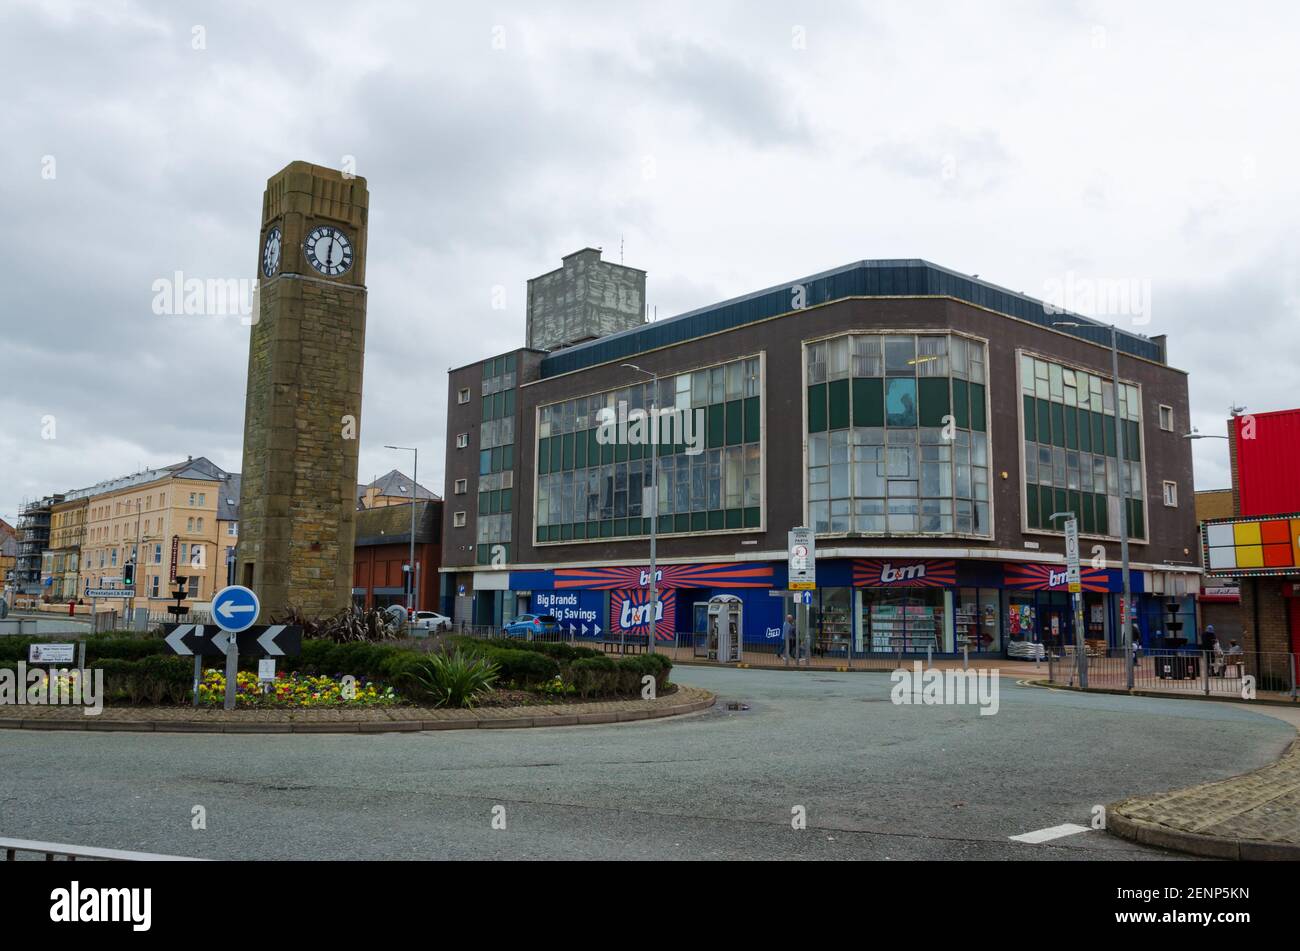 Rhyl, Denbighshire; UK: Feb 21, 2021: A general street scene showing  the B and M store on the High Street and the clock tower roundabout. Stock Photo